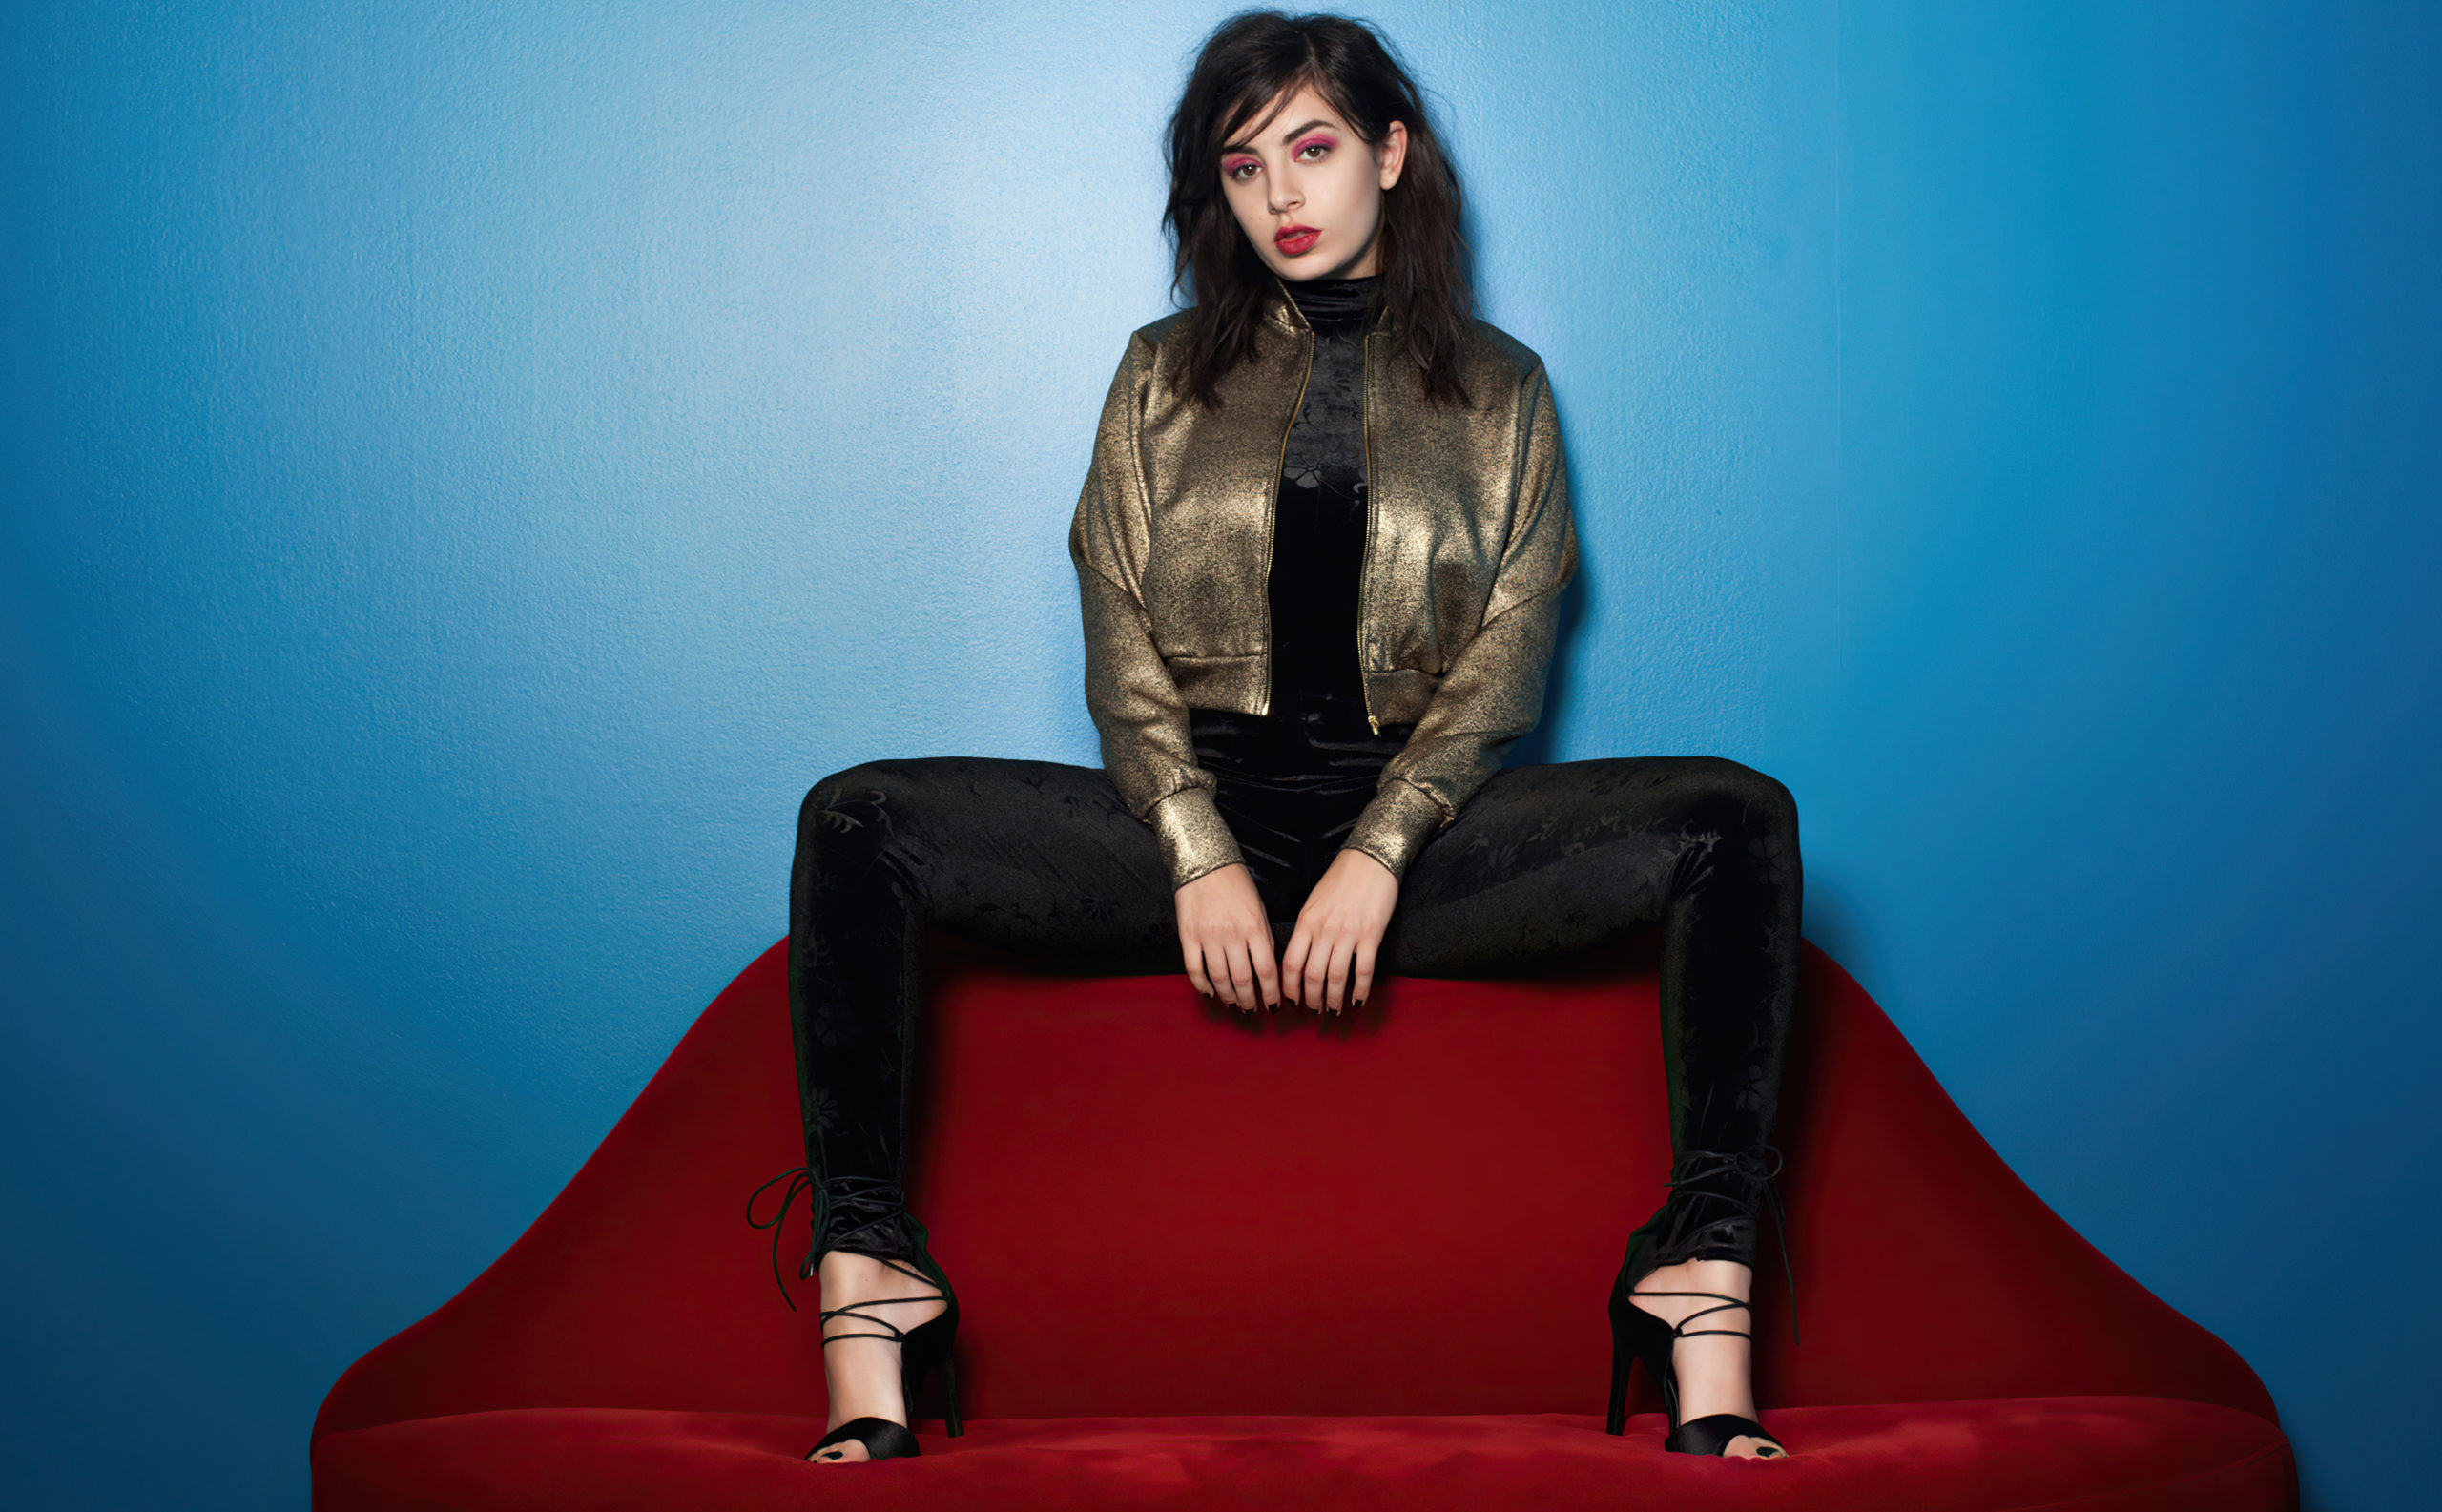 Charli XCX: A music video for the song "Breaking Up" was released on 2 December 2014. 2560x1590 HD Background.